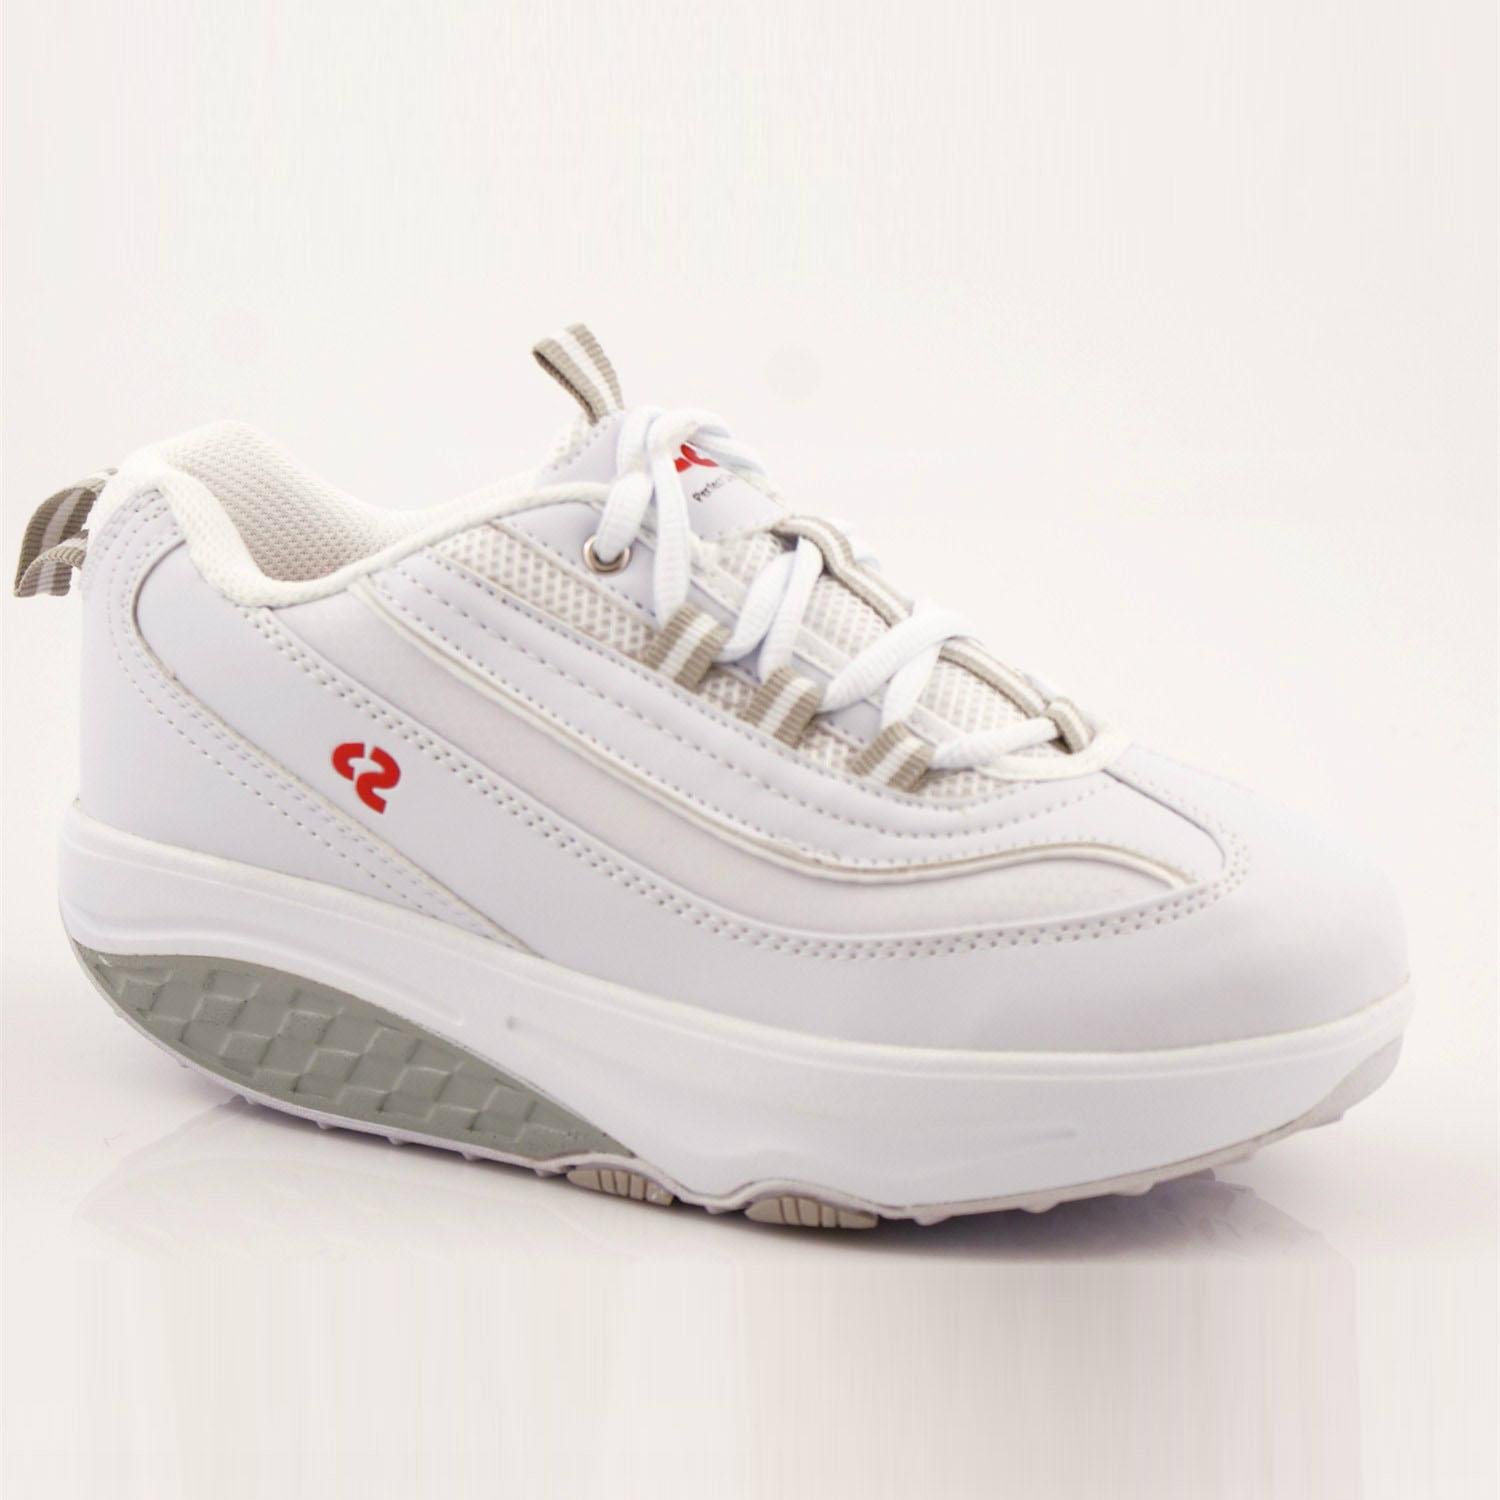 Hotsale perfect steps fitness shoes - HS-0001 - HS (China Manufacturer) -  Athletic & Sports Shoes - Shoes Products - DIYTrade China